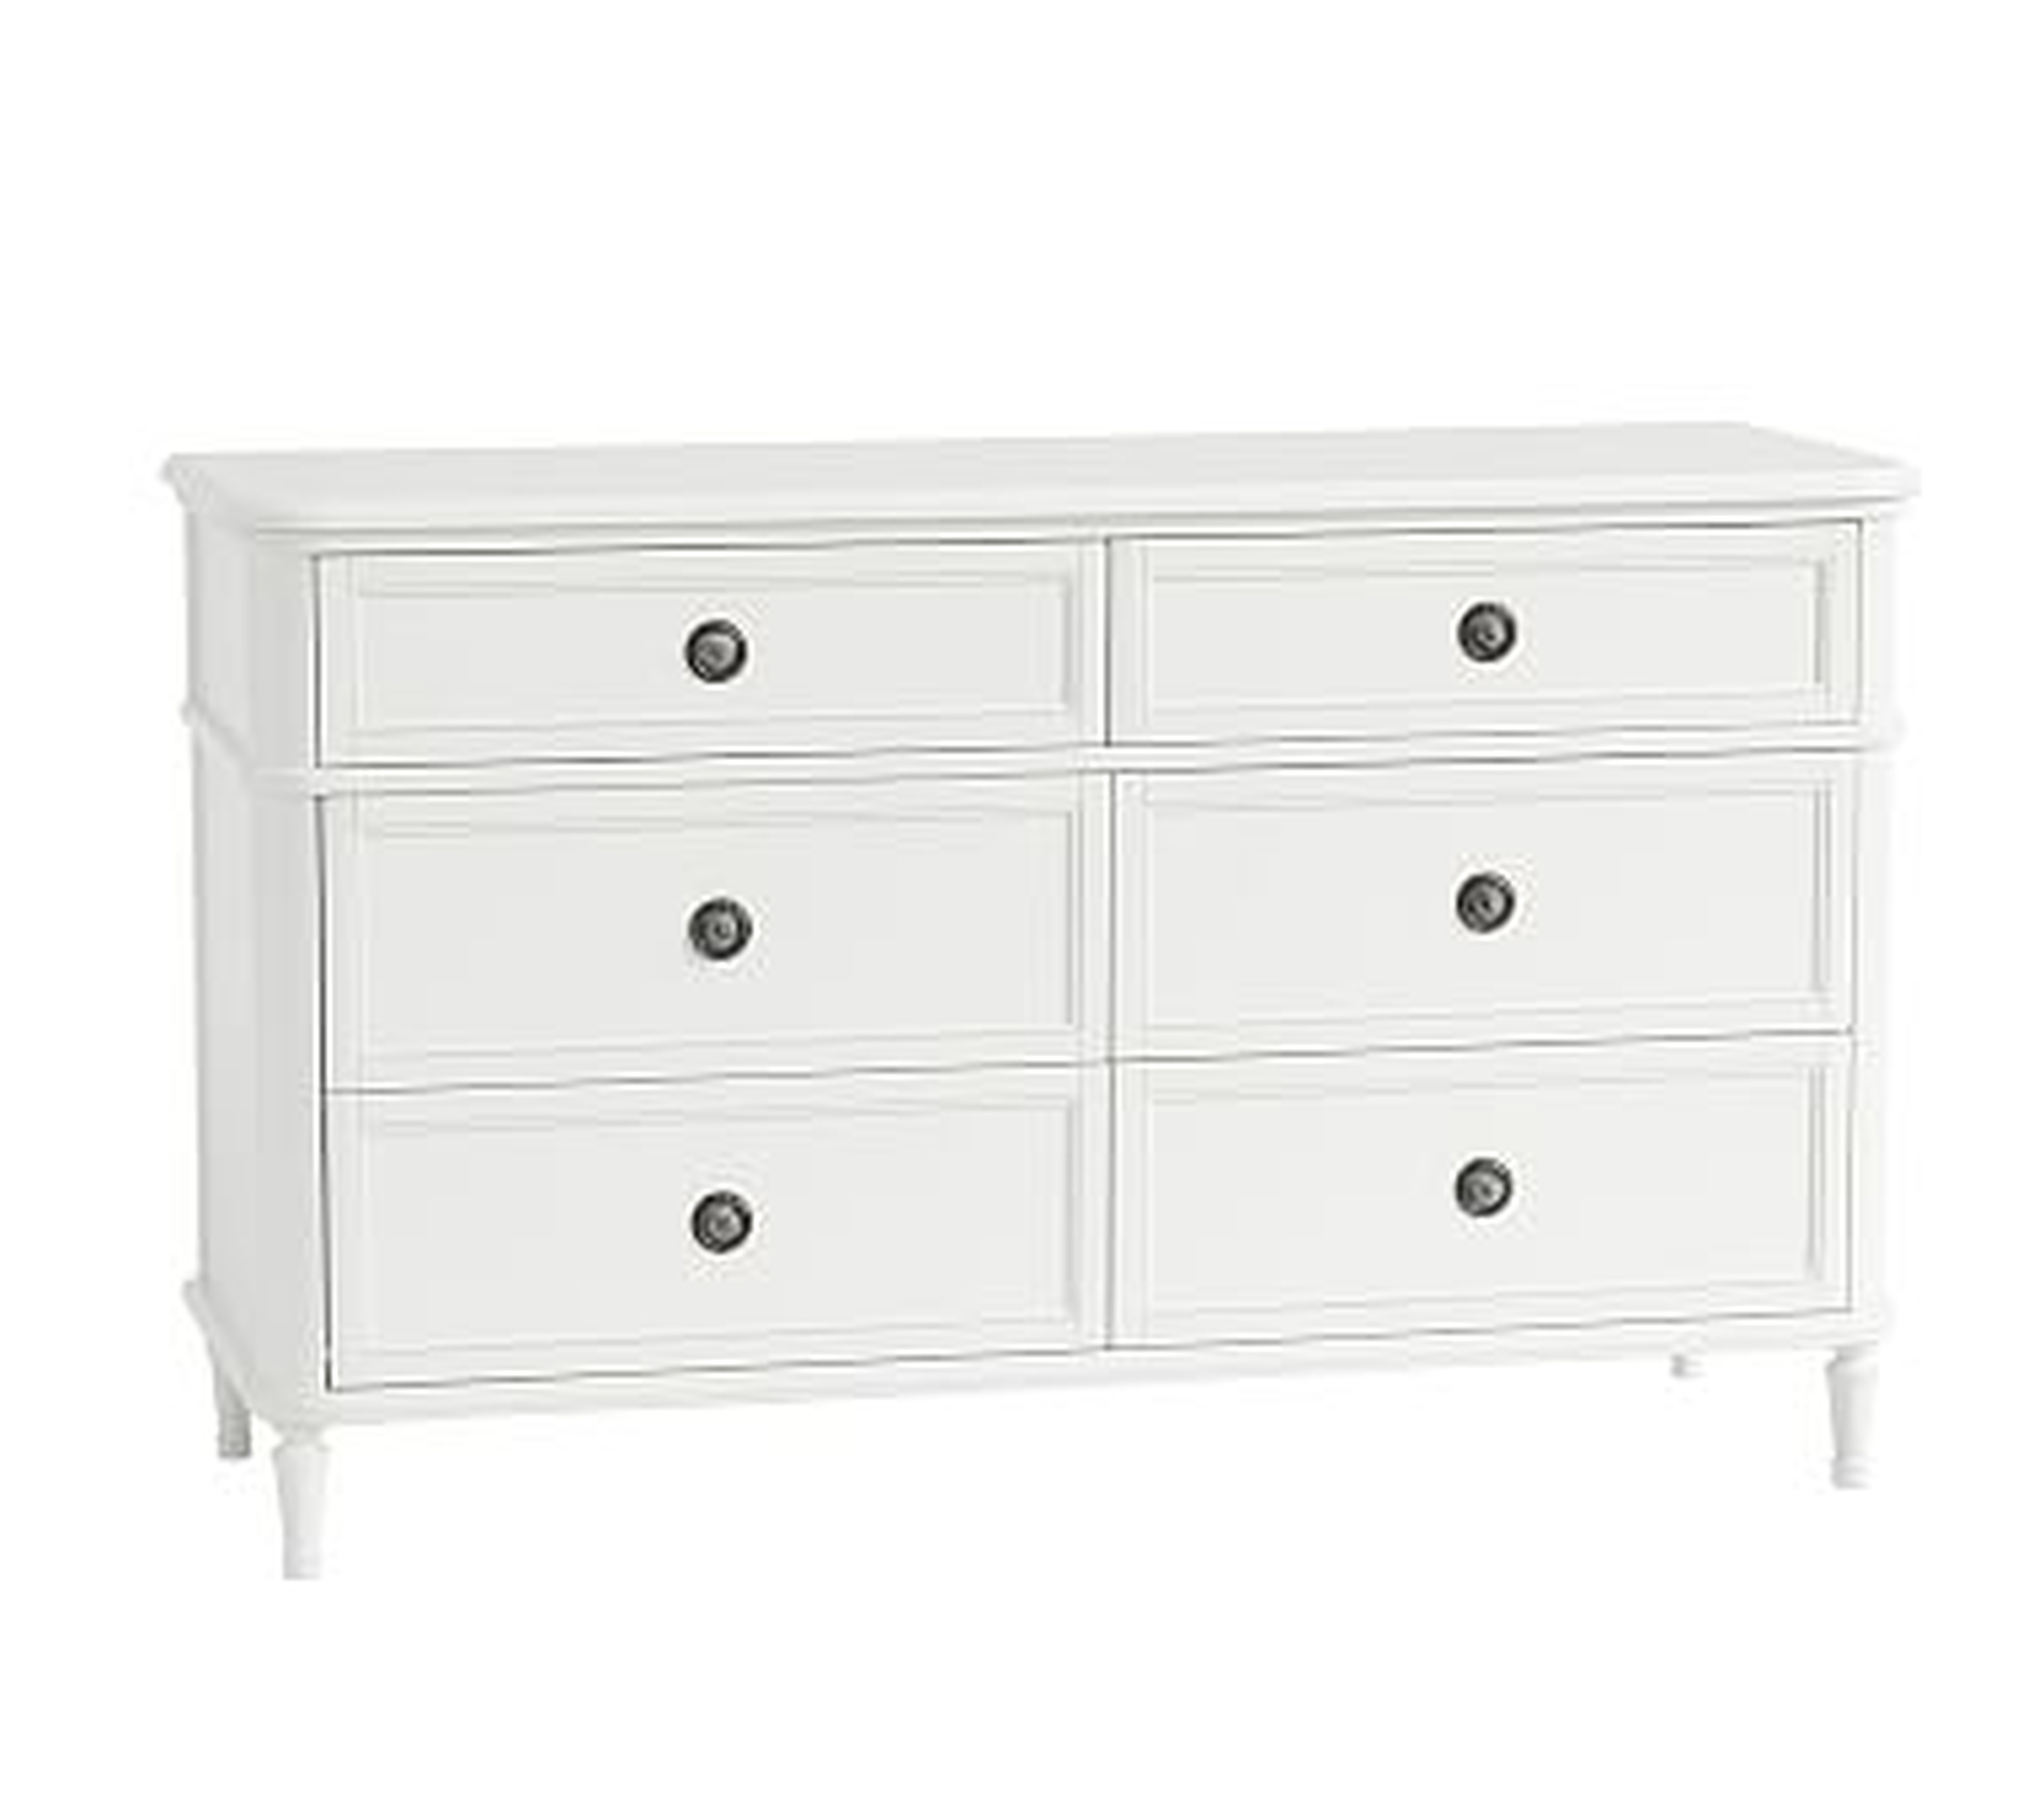 Colette Extra Wide Dresser, Simply White, Flat Rate - Pottery Barn Kids